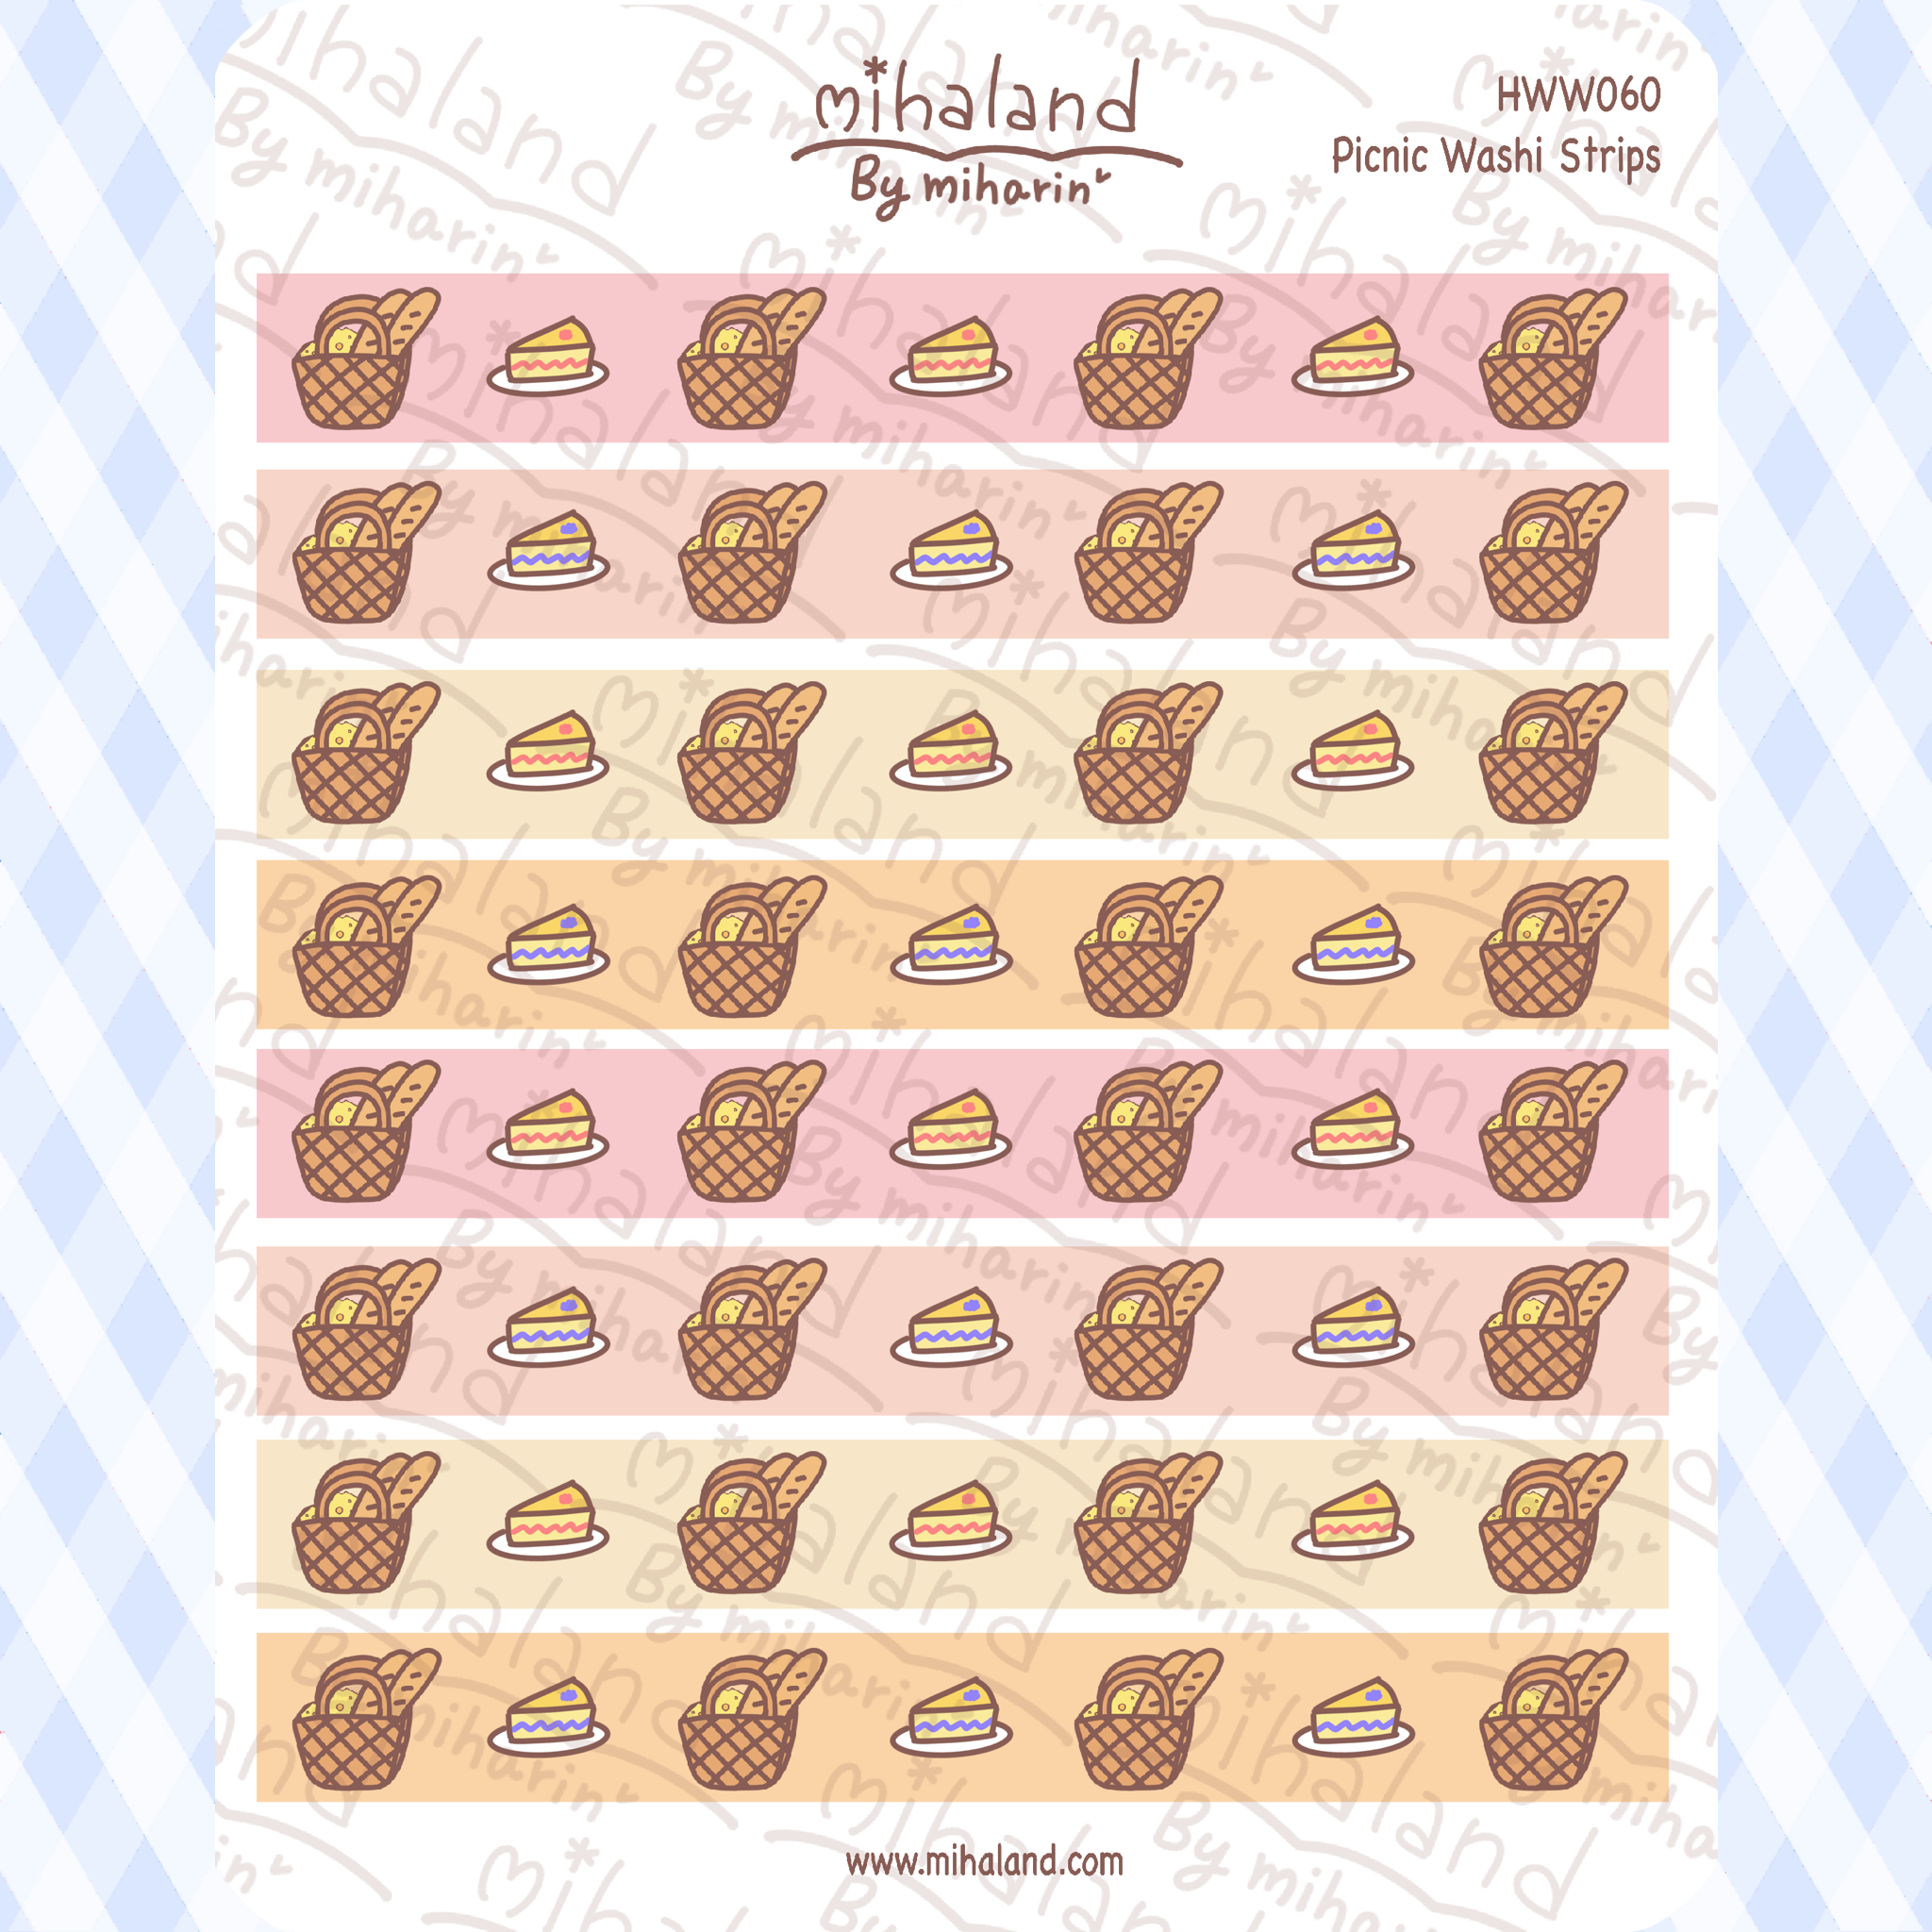 Picnic Washi Strips for Hobonichi Weeks Planner Stickers (HWW060)